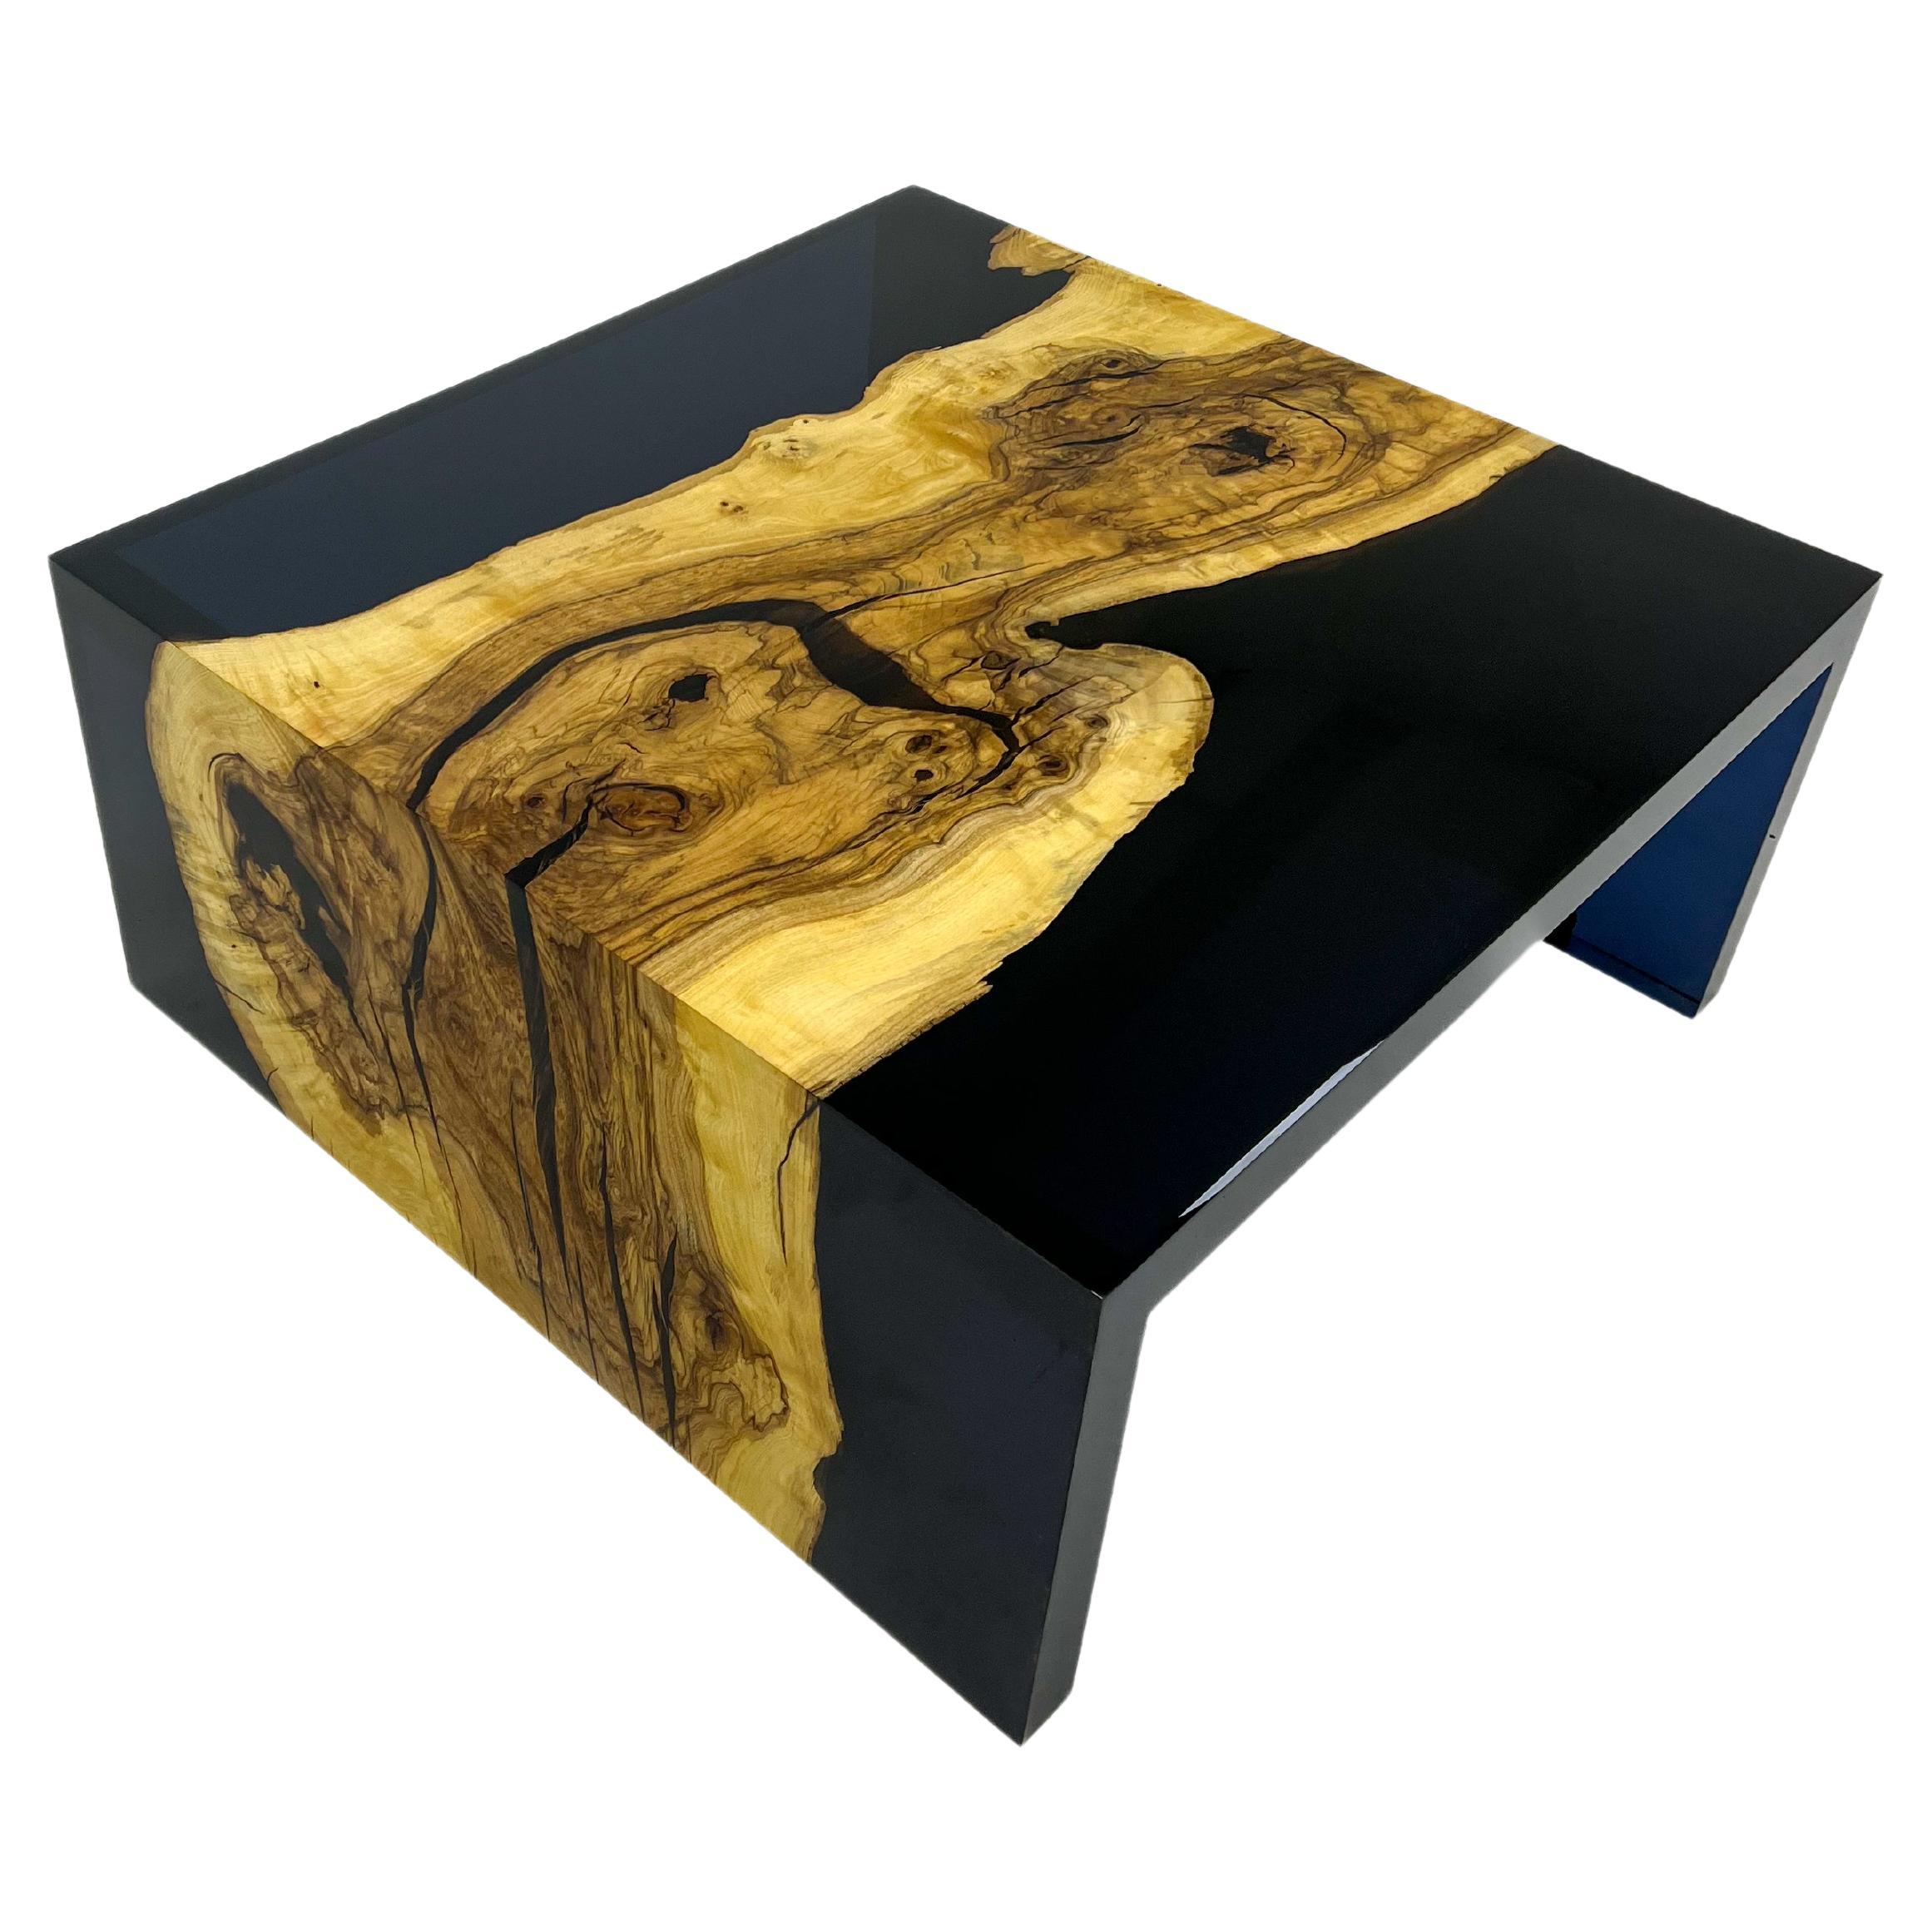 Waterfall Black Epoxy Resin Coffee Table and Walnut Wood Center